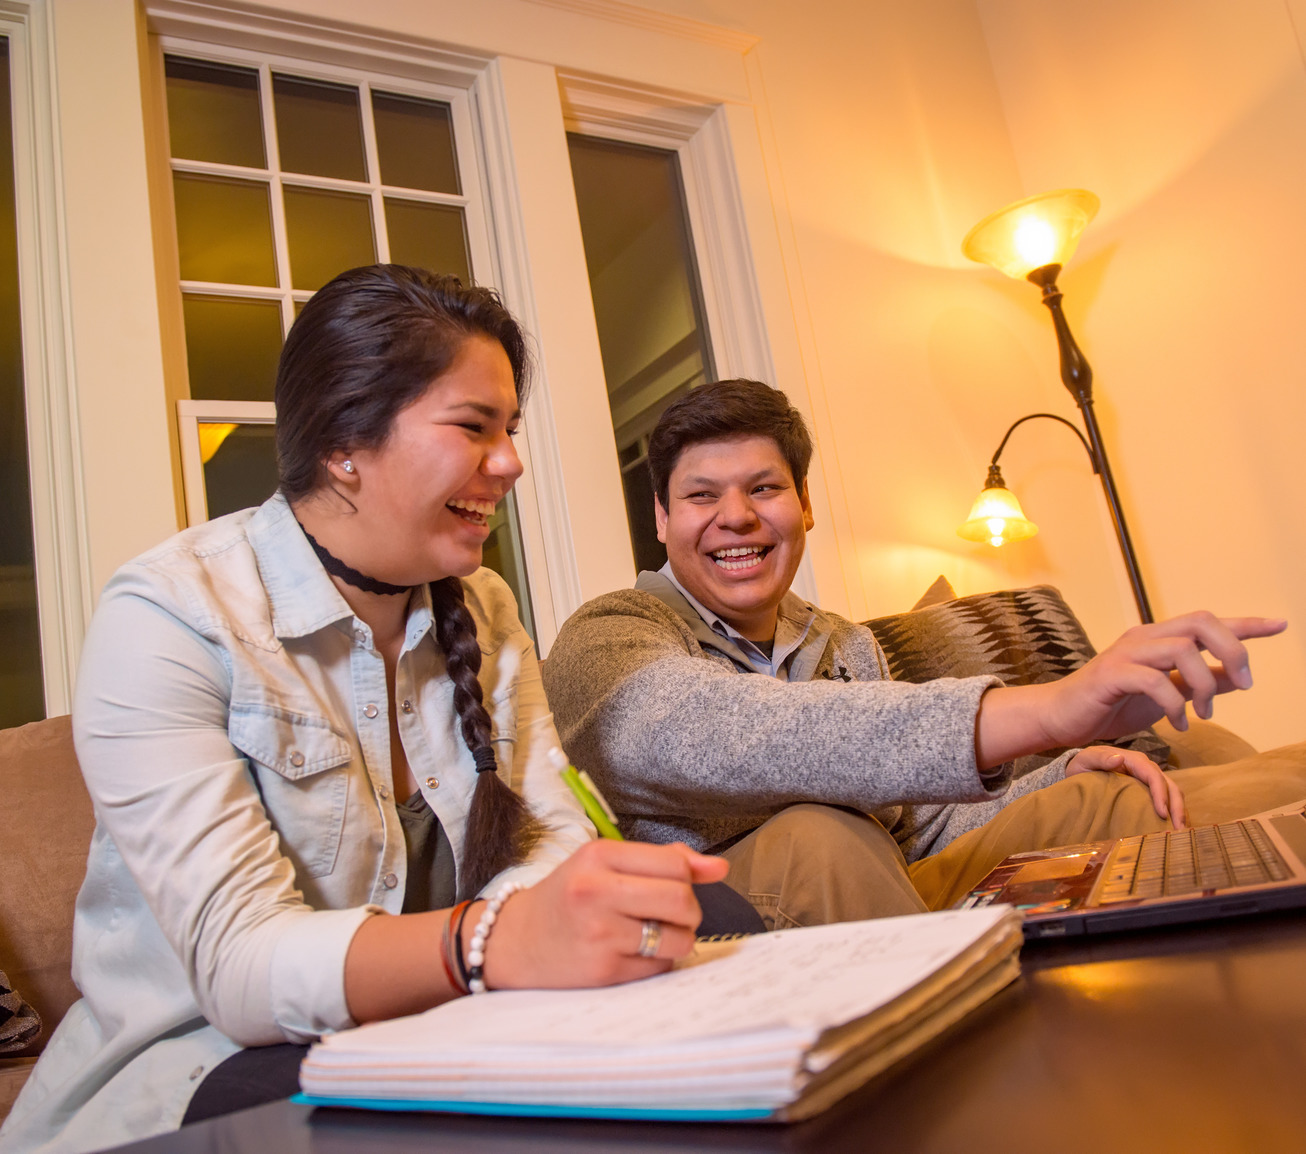 Two students laugh while studying together on a couch.